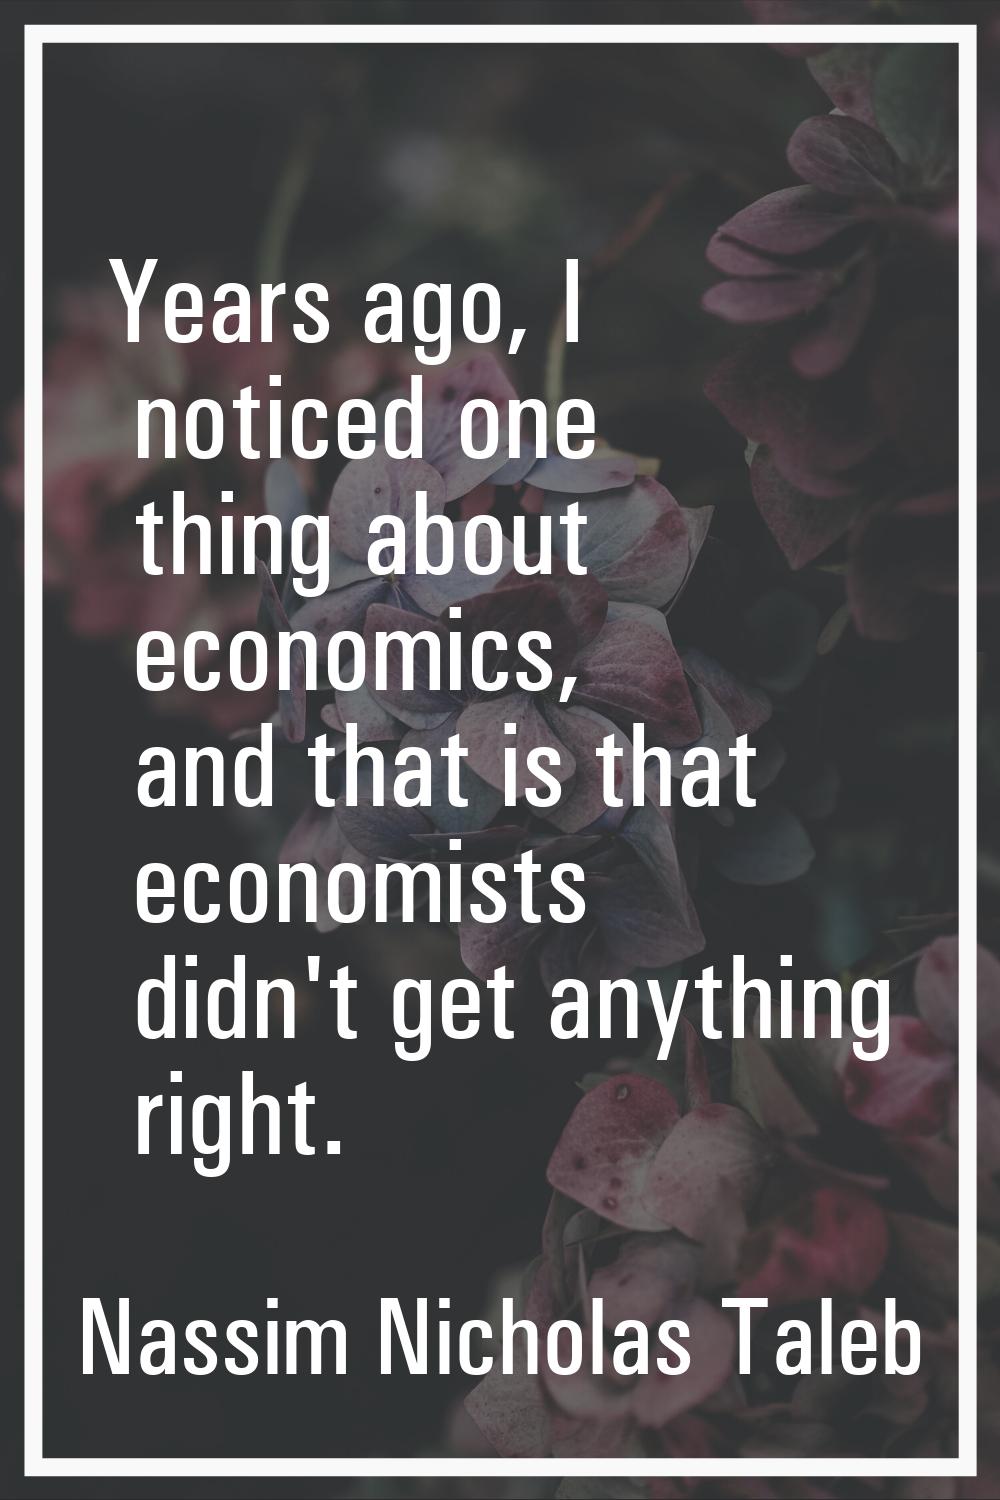 Years ago, I noticed one thing about economics, and that is that economists didn't get anything rig